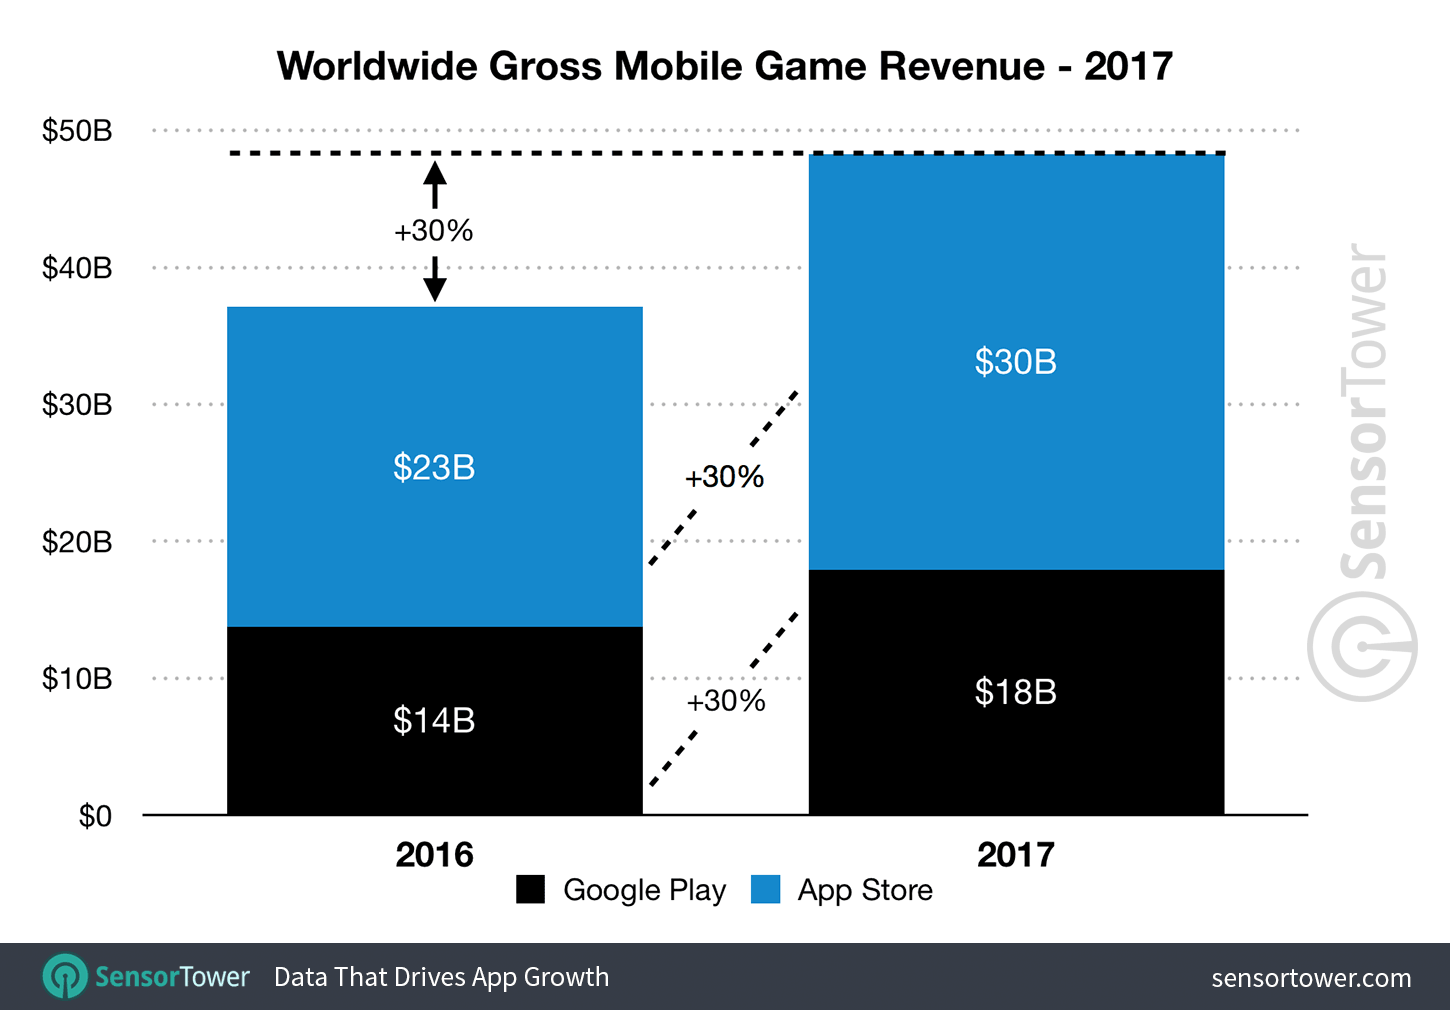 Gross revenue from games (App Store and Google Play) in 2017